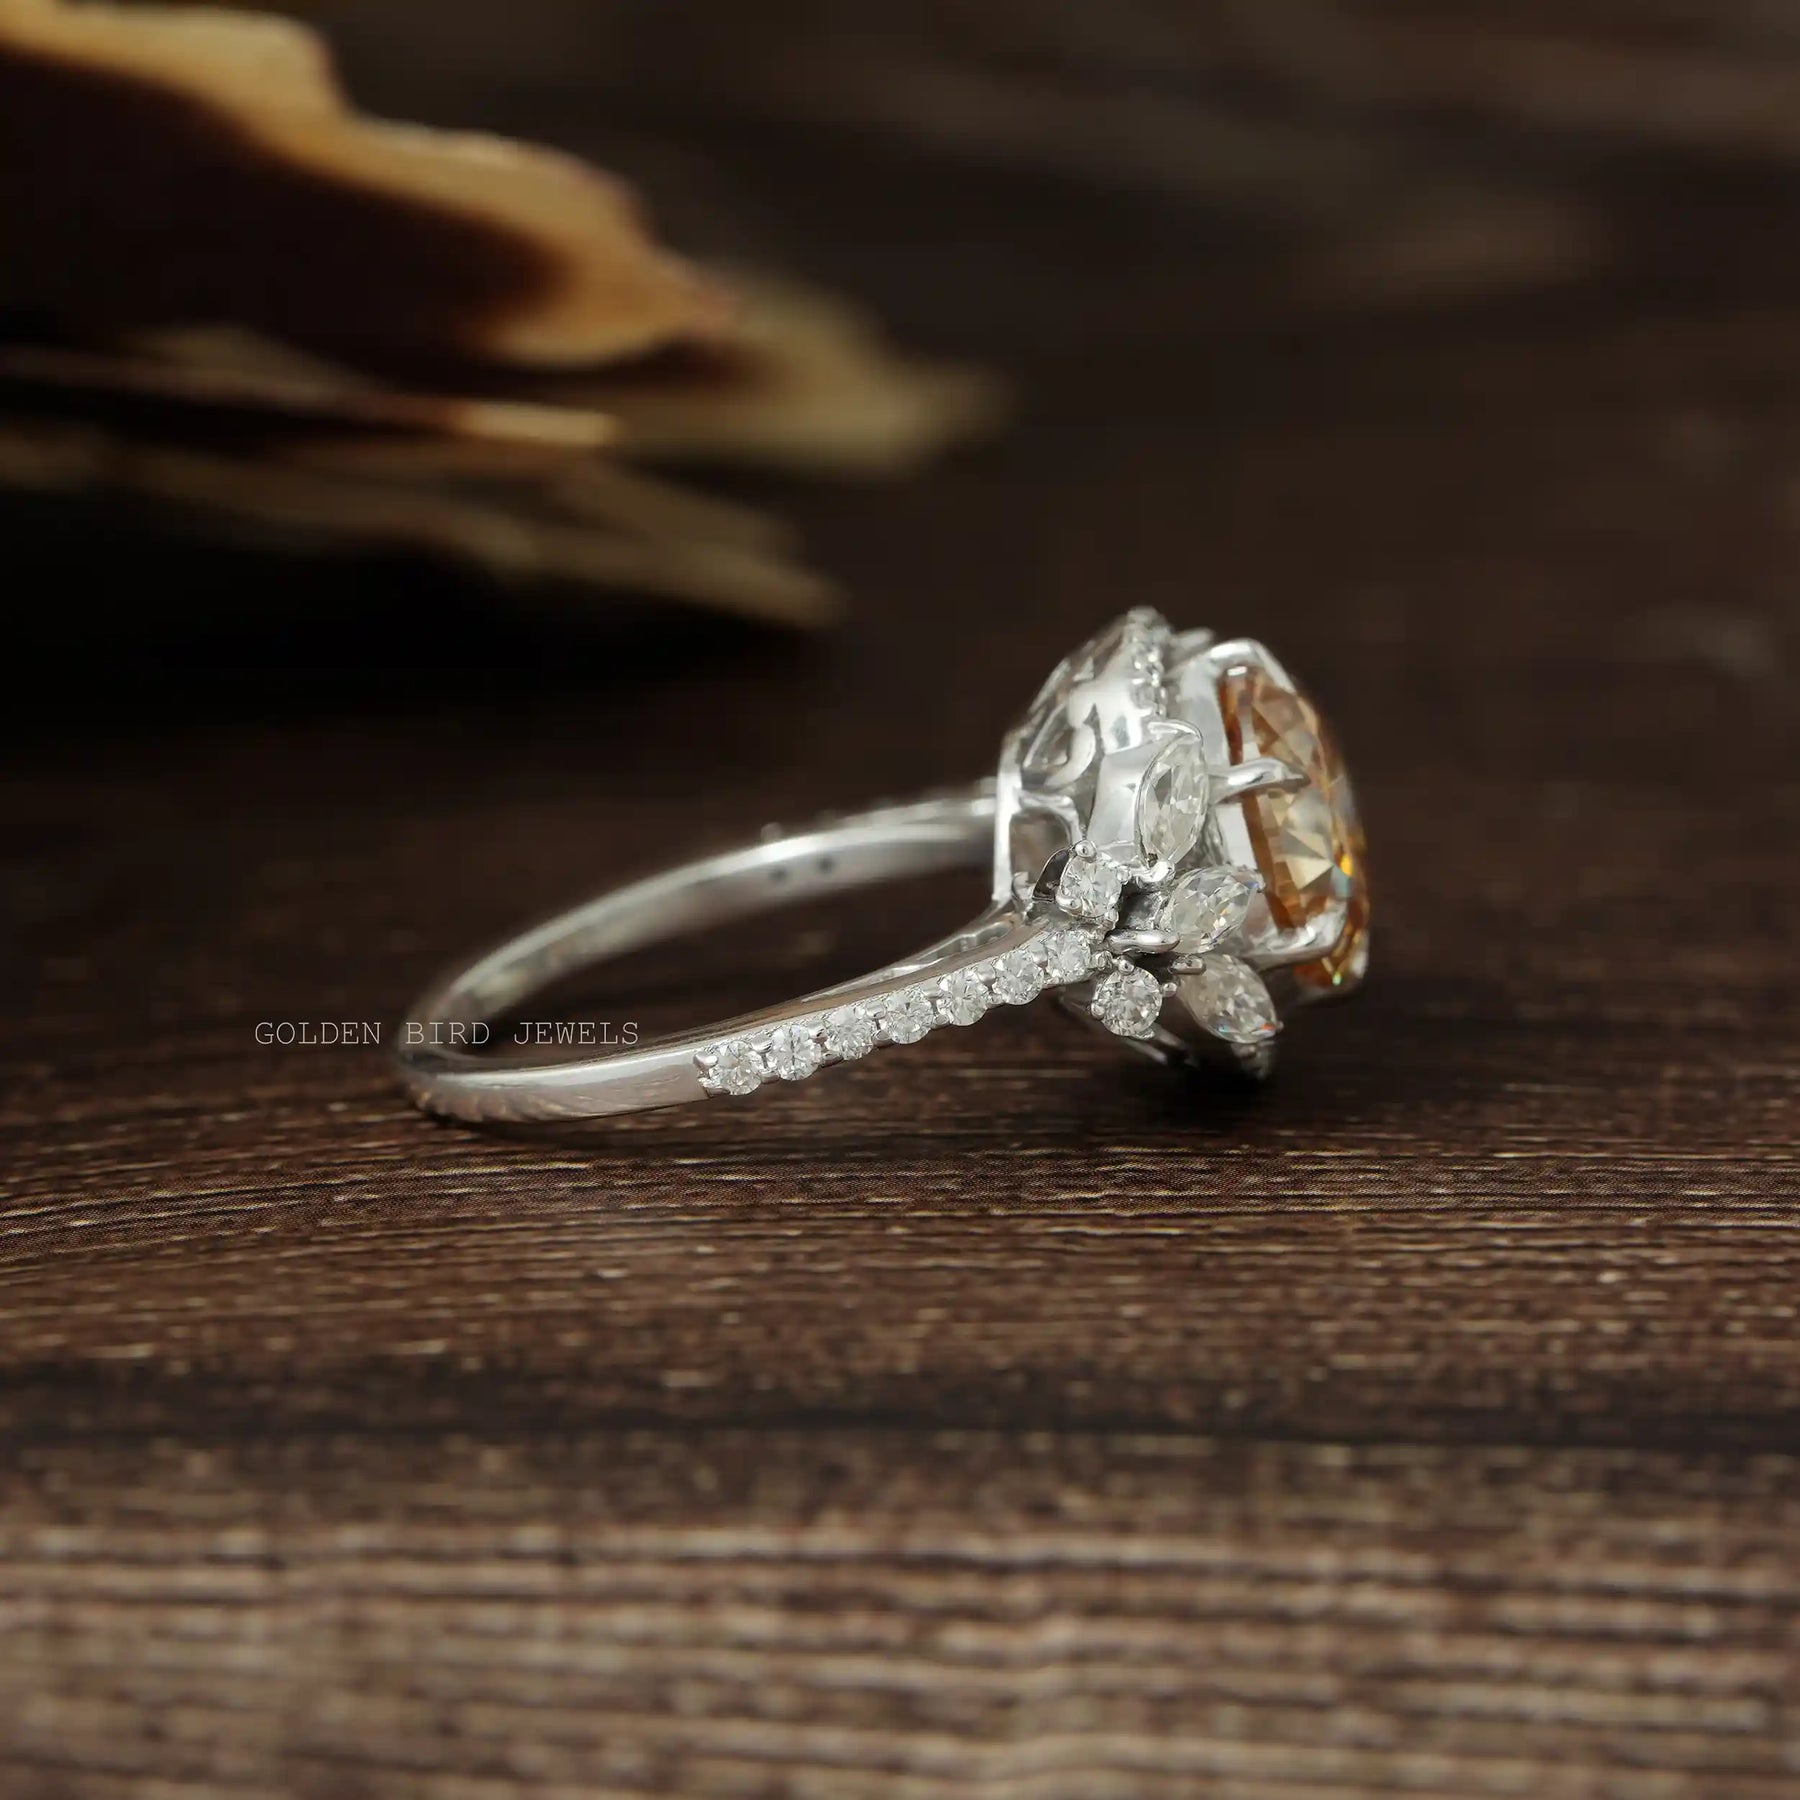 [This halo cluster moissanite ring made in champagne old european round cut moissanite]-[Golden Bird Jewels]